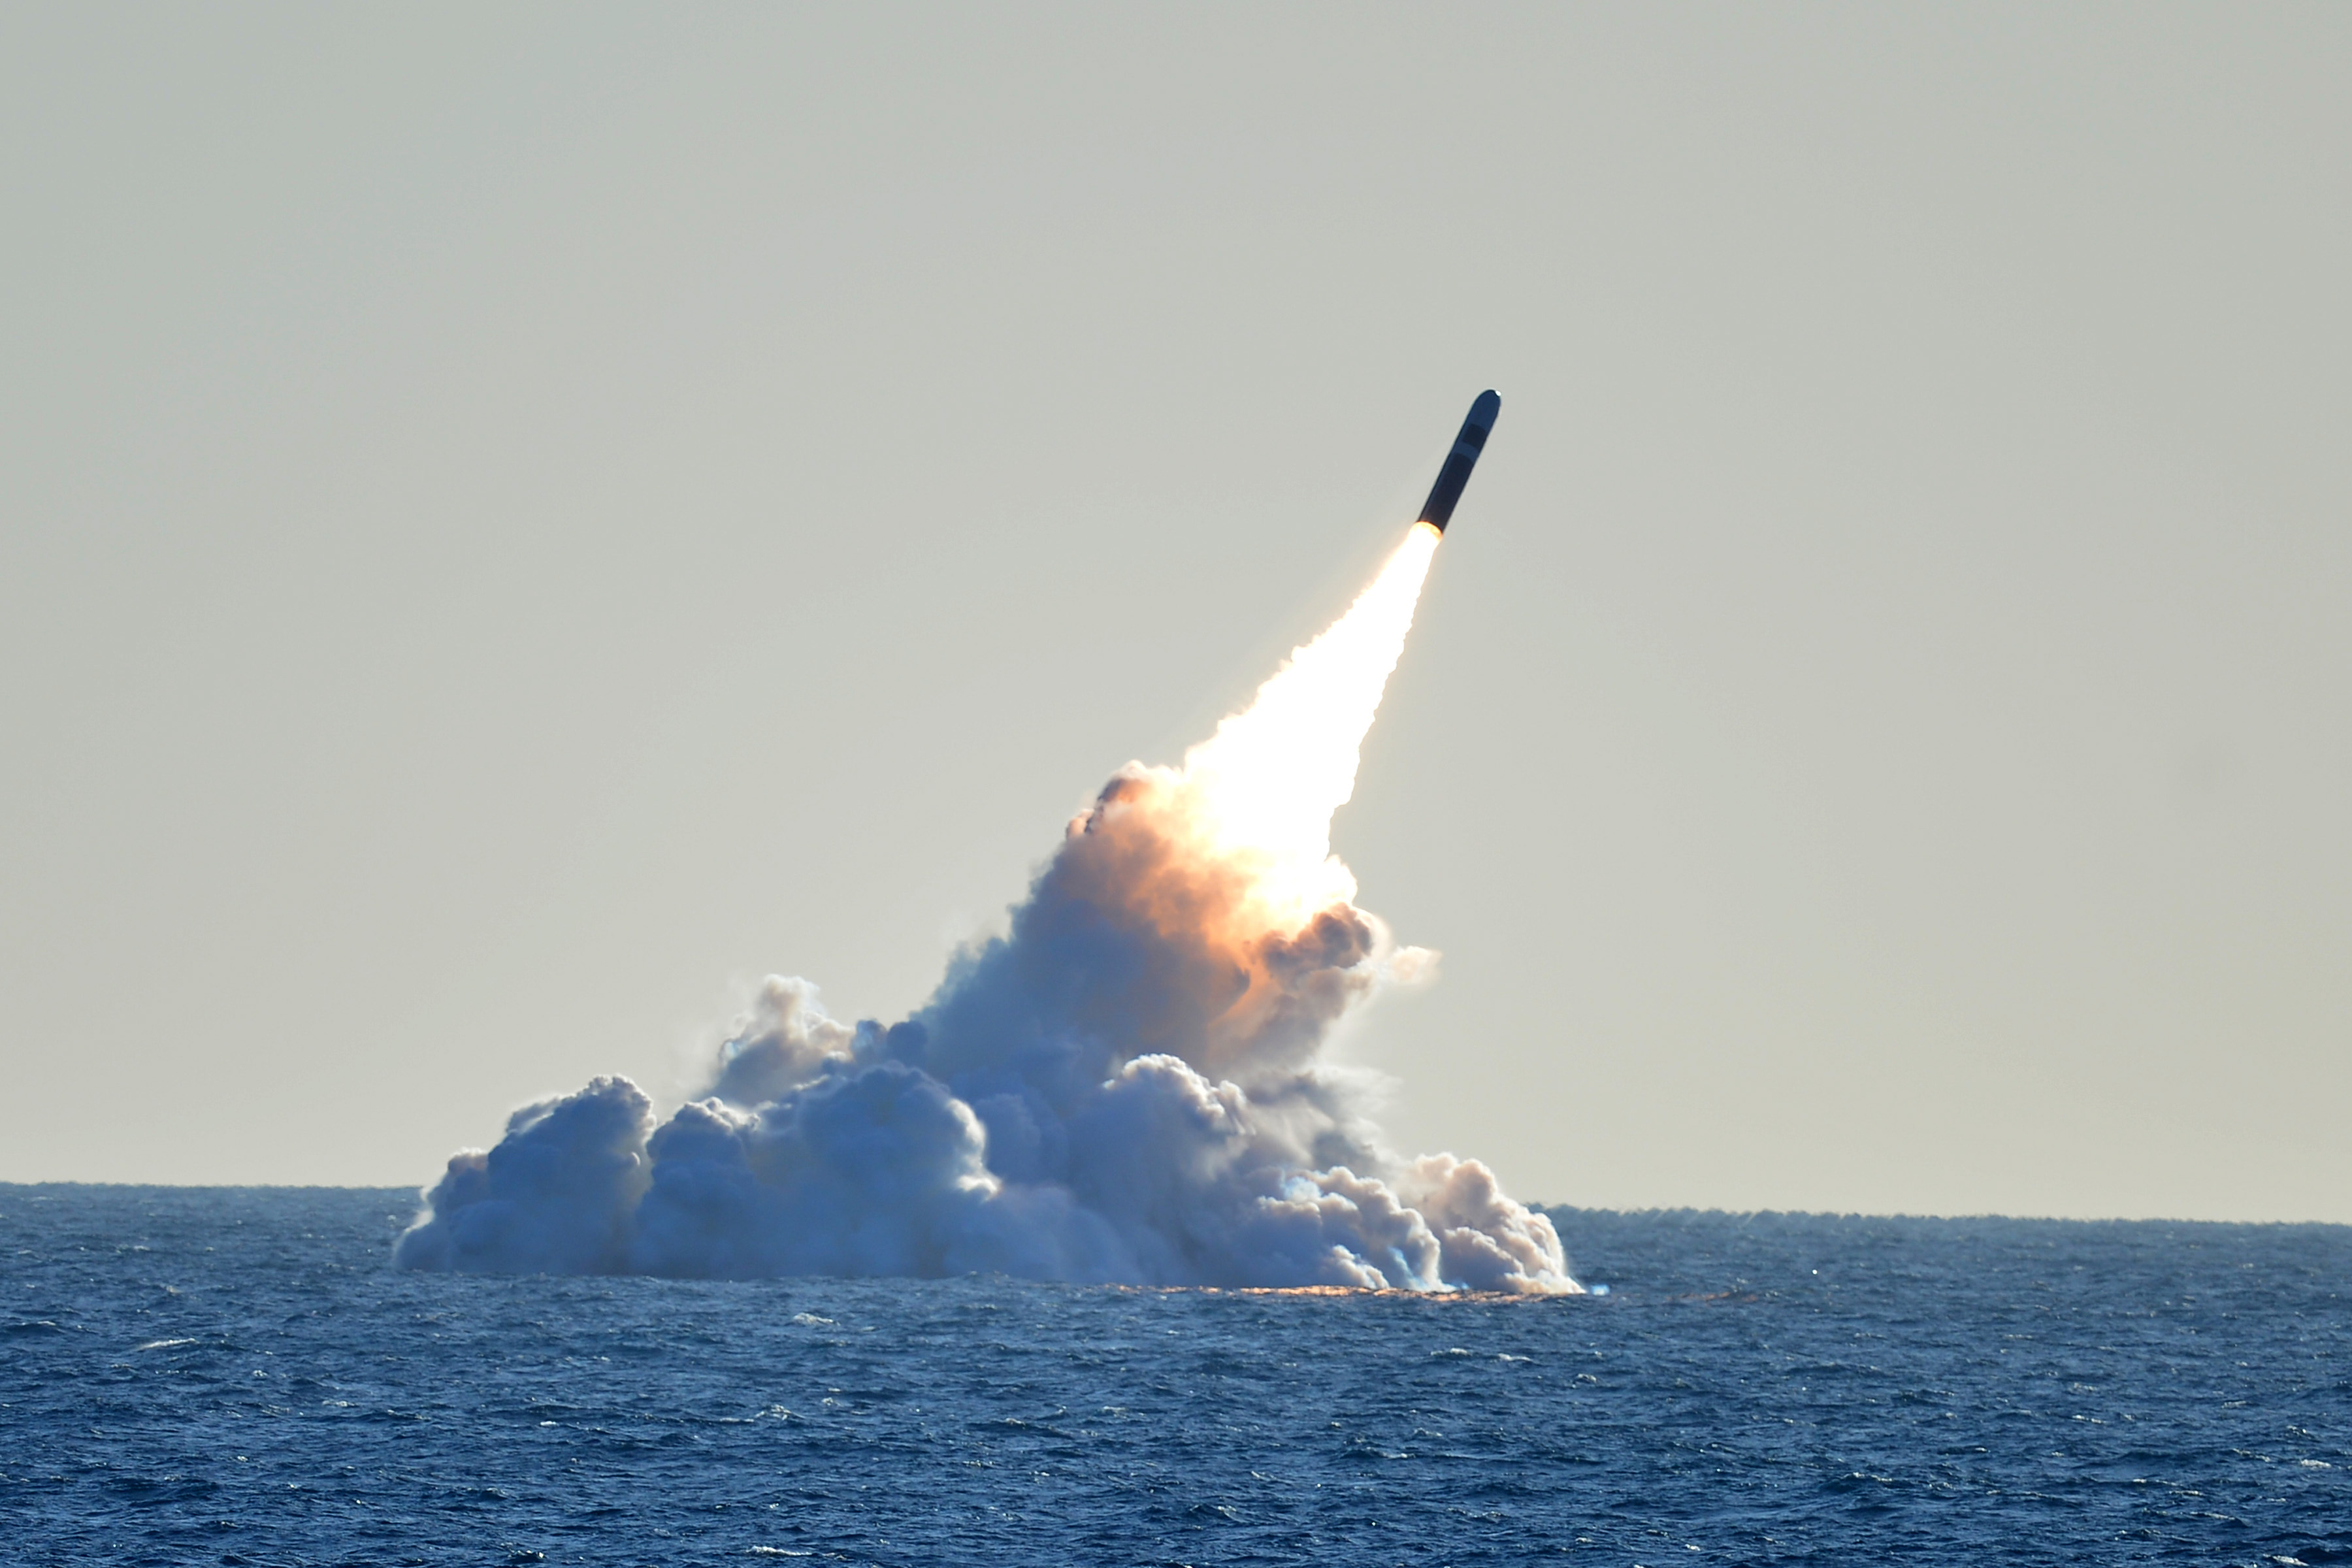 Lockheed Wins $601 Million for Trident II D5 Submarine Launched Ballistic Missile